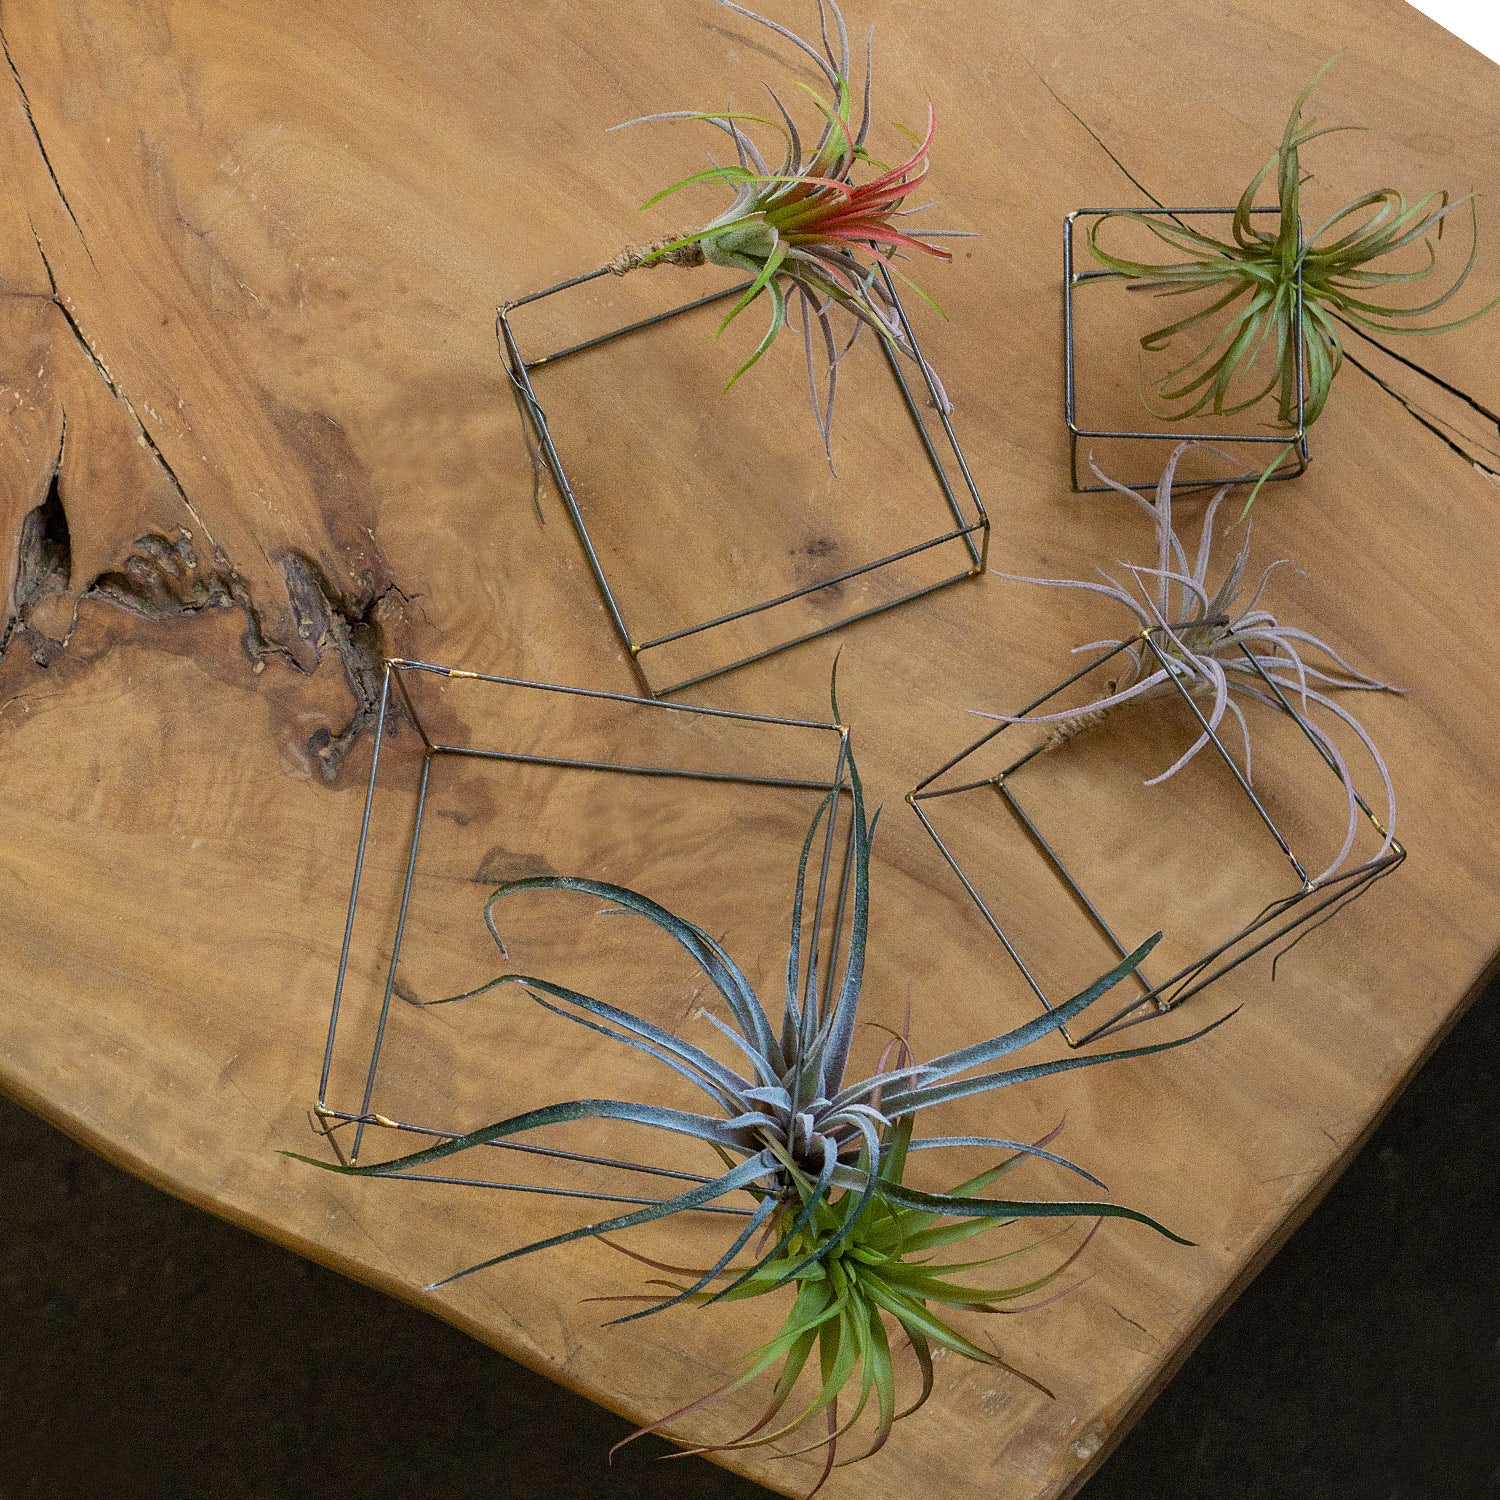 A selection of air plants tied to raw wire cube sculptures on a wood table, overhead view.